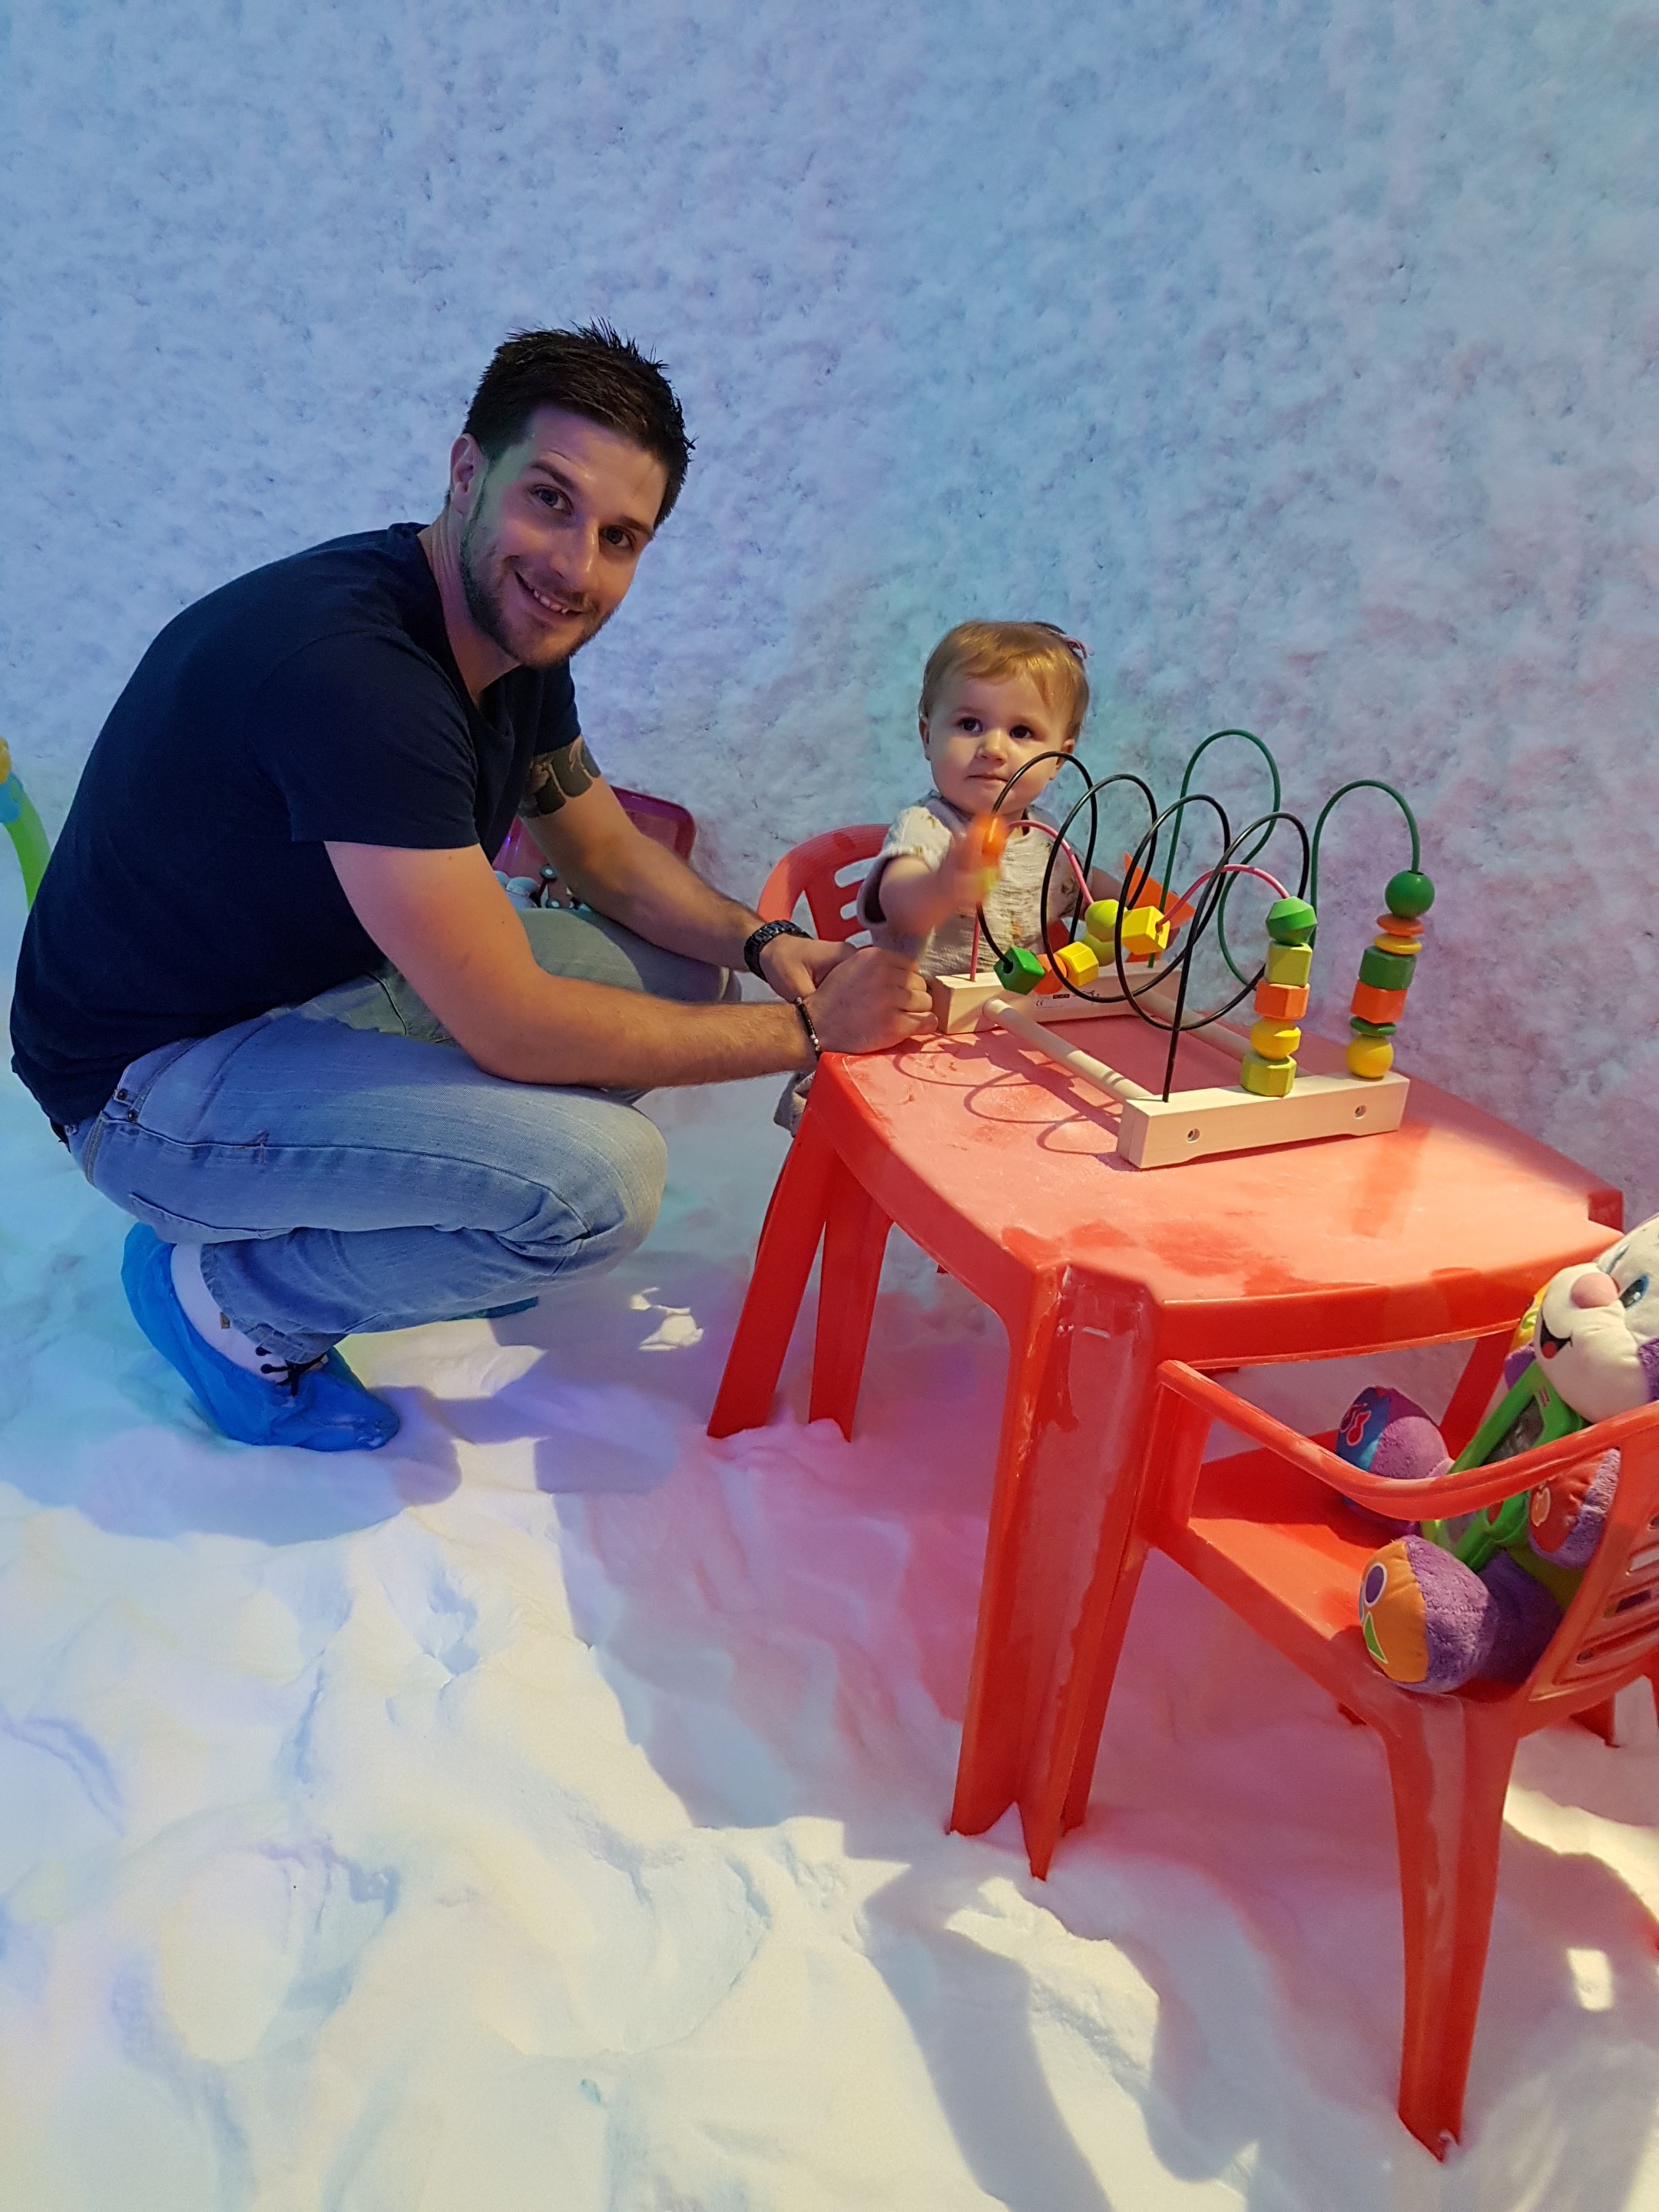 Little Ruby Green and her father David Green enjoy a salt therapy treatment at the Salt Cave in Brierley Hill, near Dudley